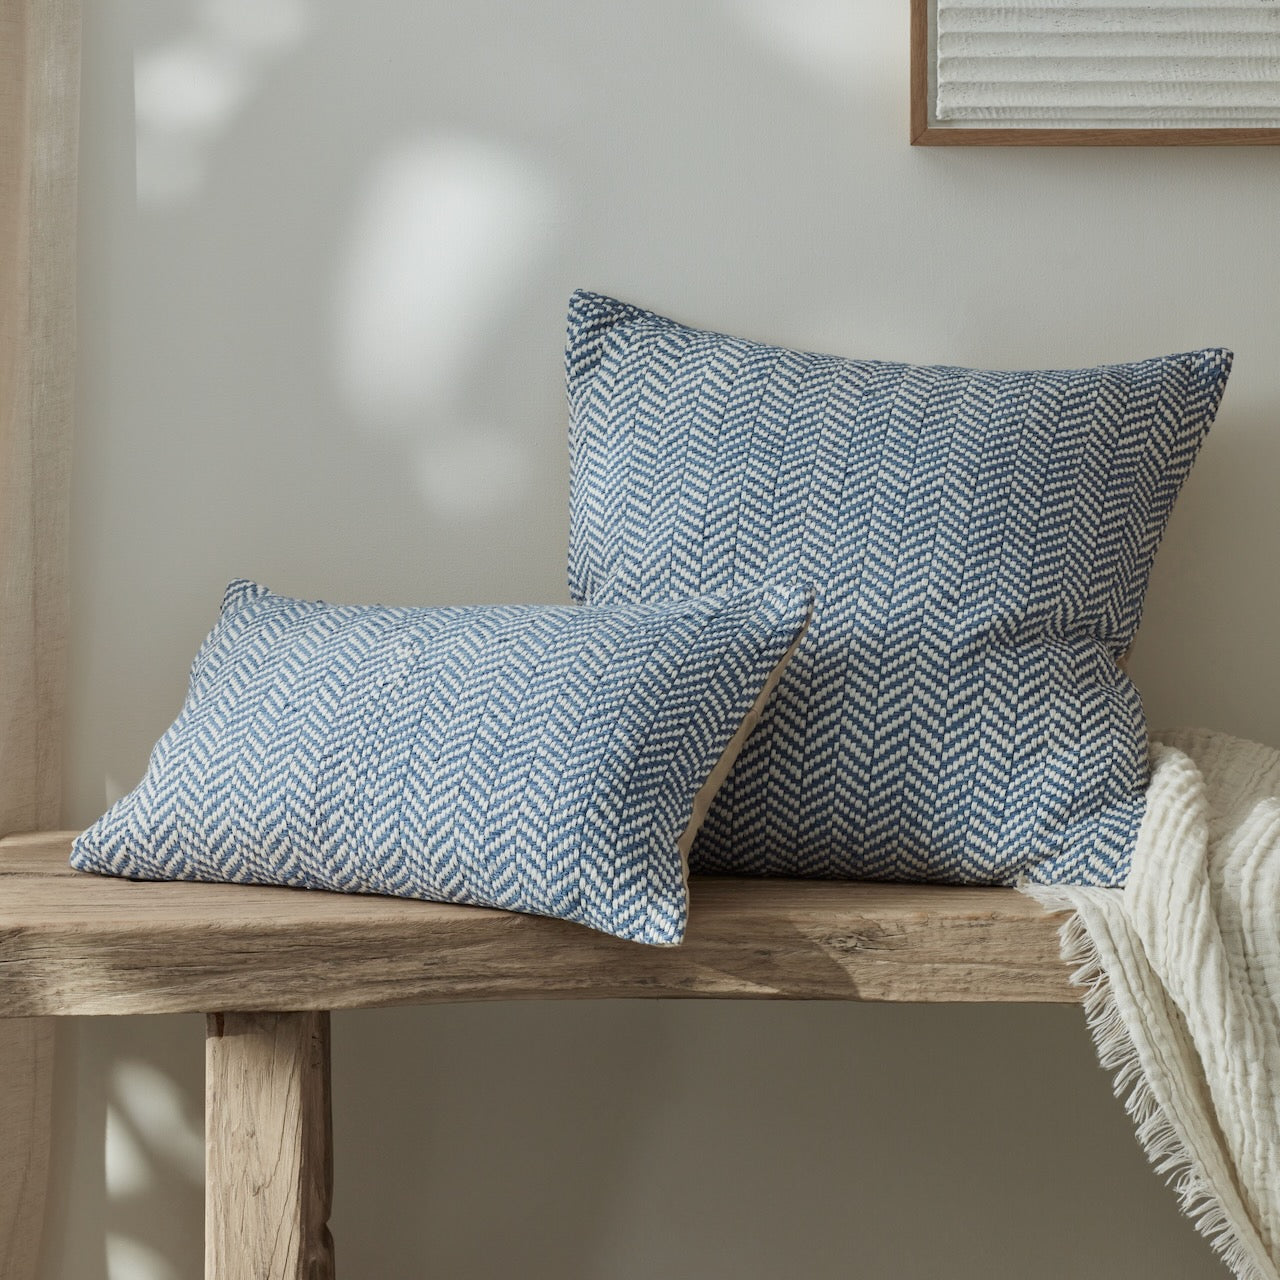 Blue Herringbone Cushion Cover available in square and rectangular size 